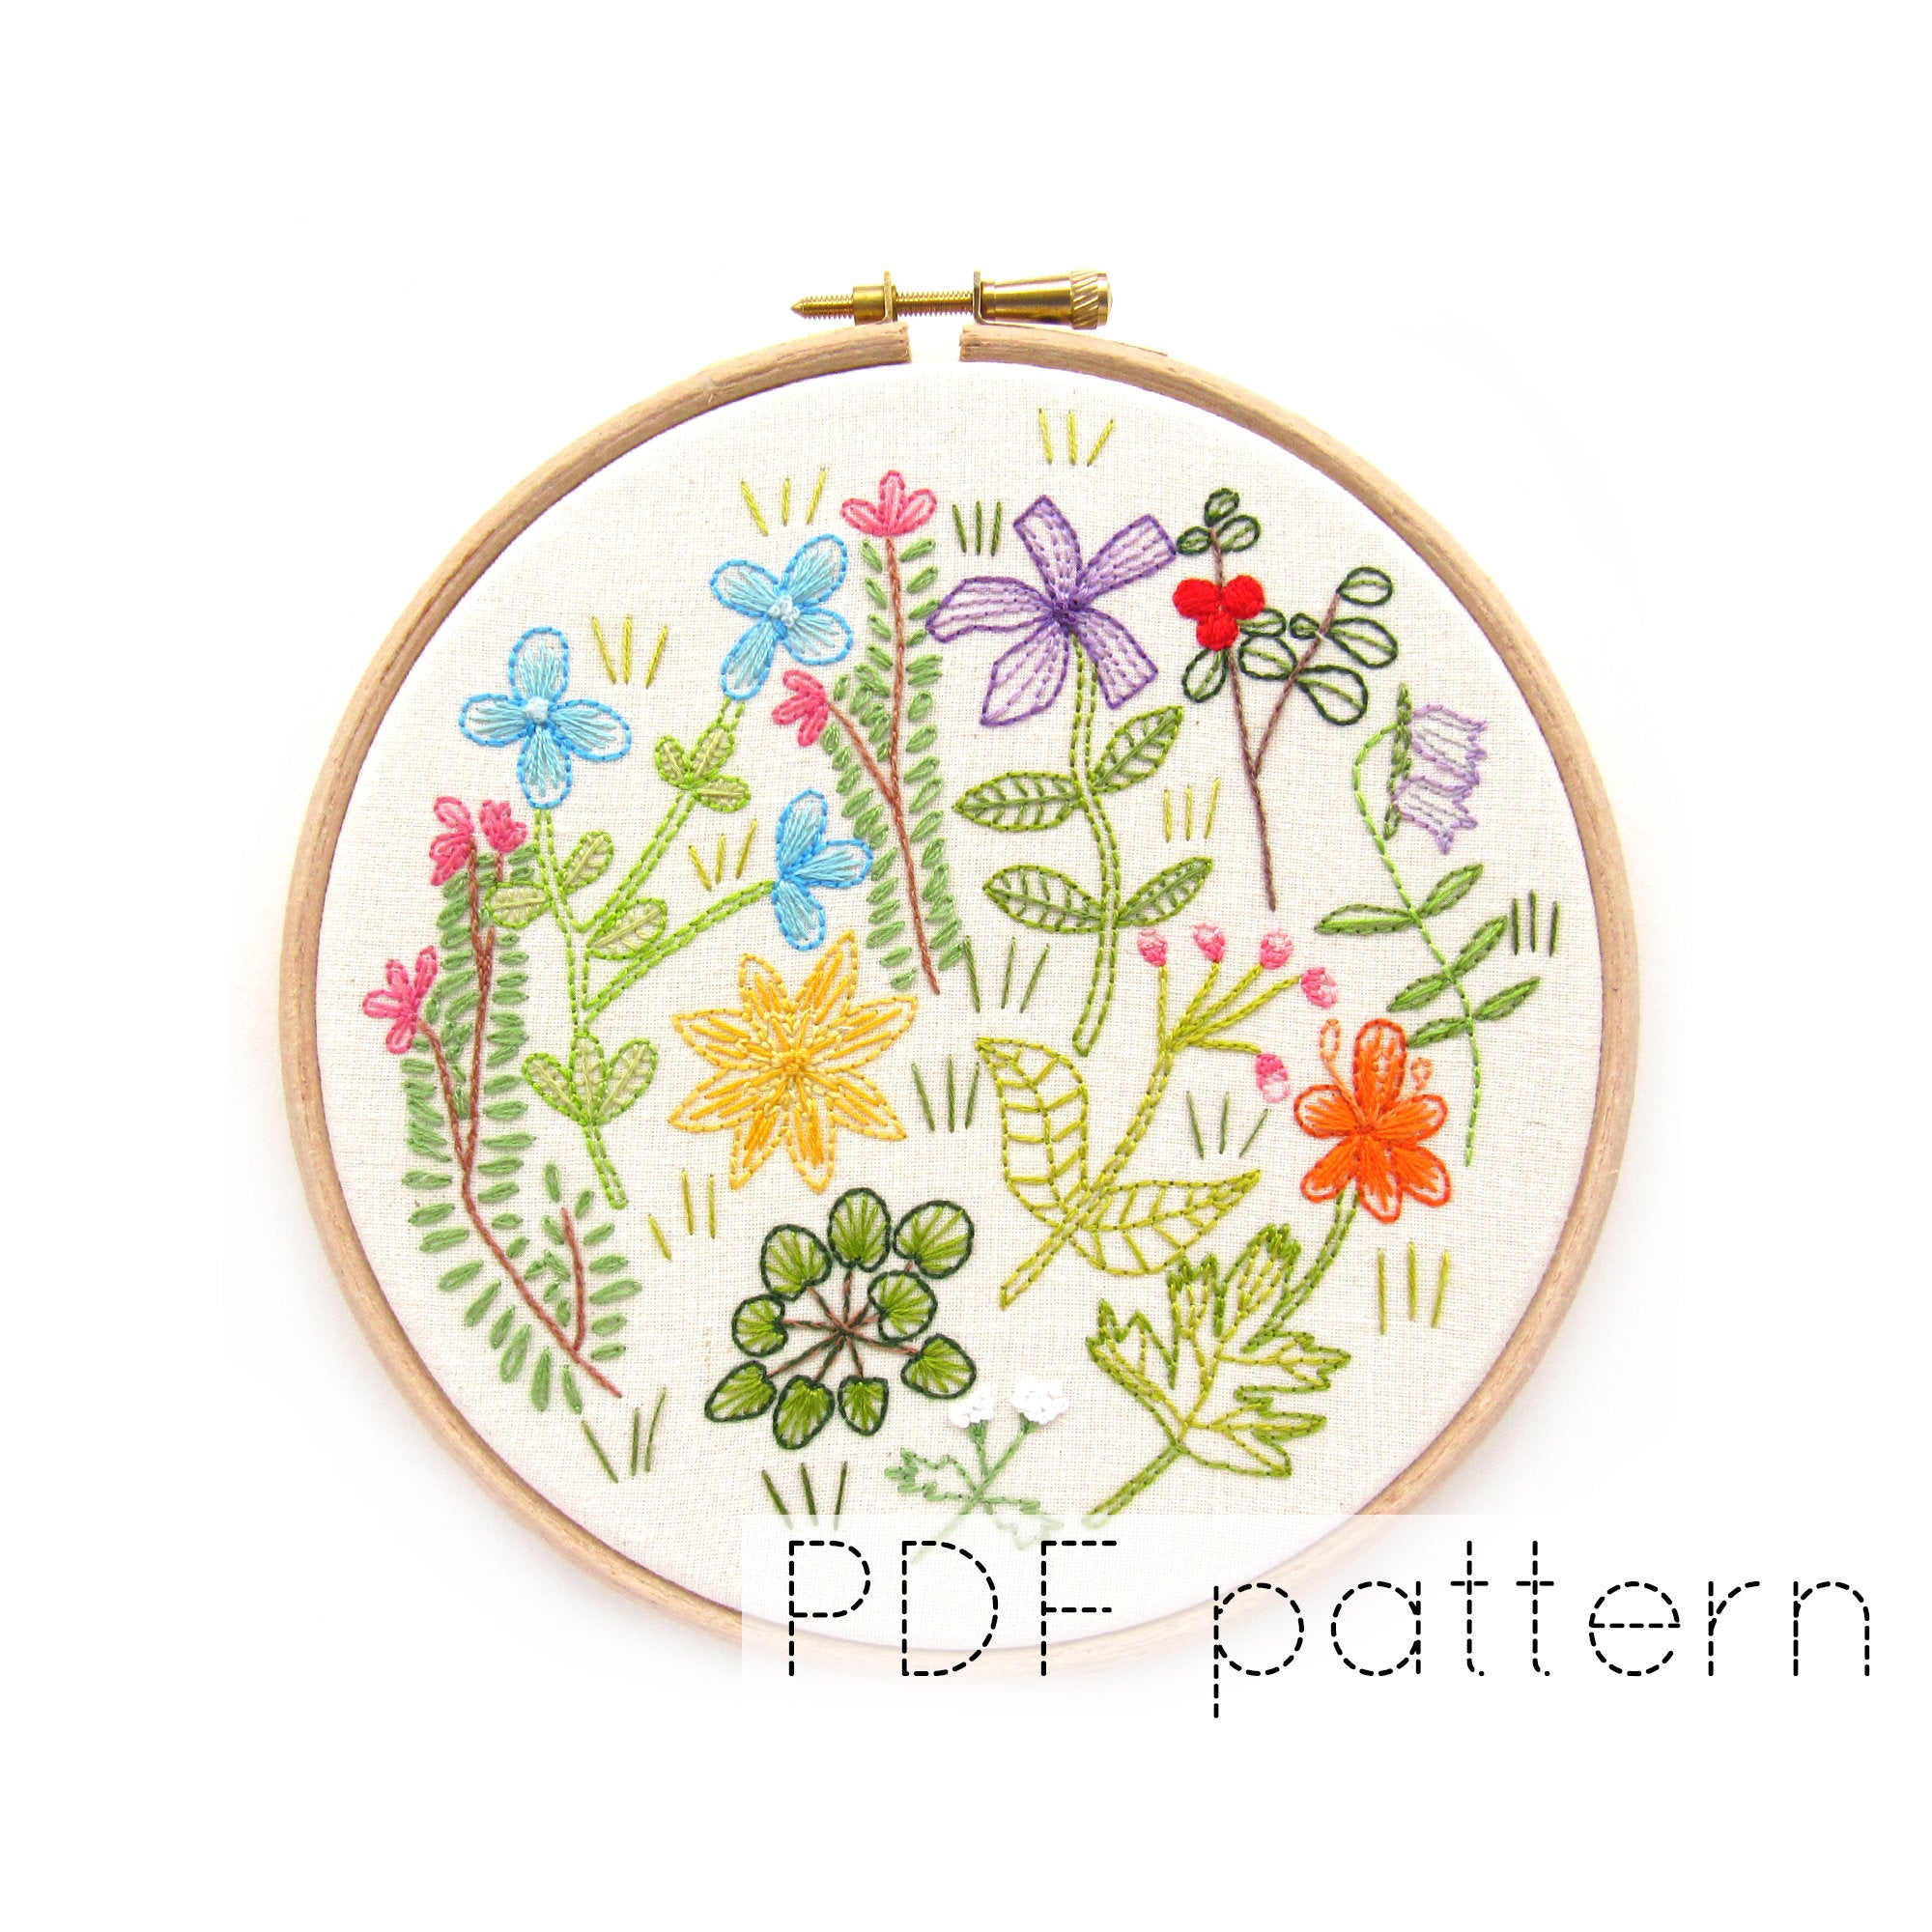 Embroidery Patterns For Sale Wildflower Embroidery Pattern Pdf Instant Download Hand Embroidery Hoop Art Pattern